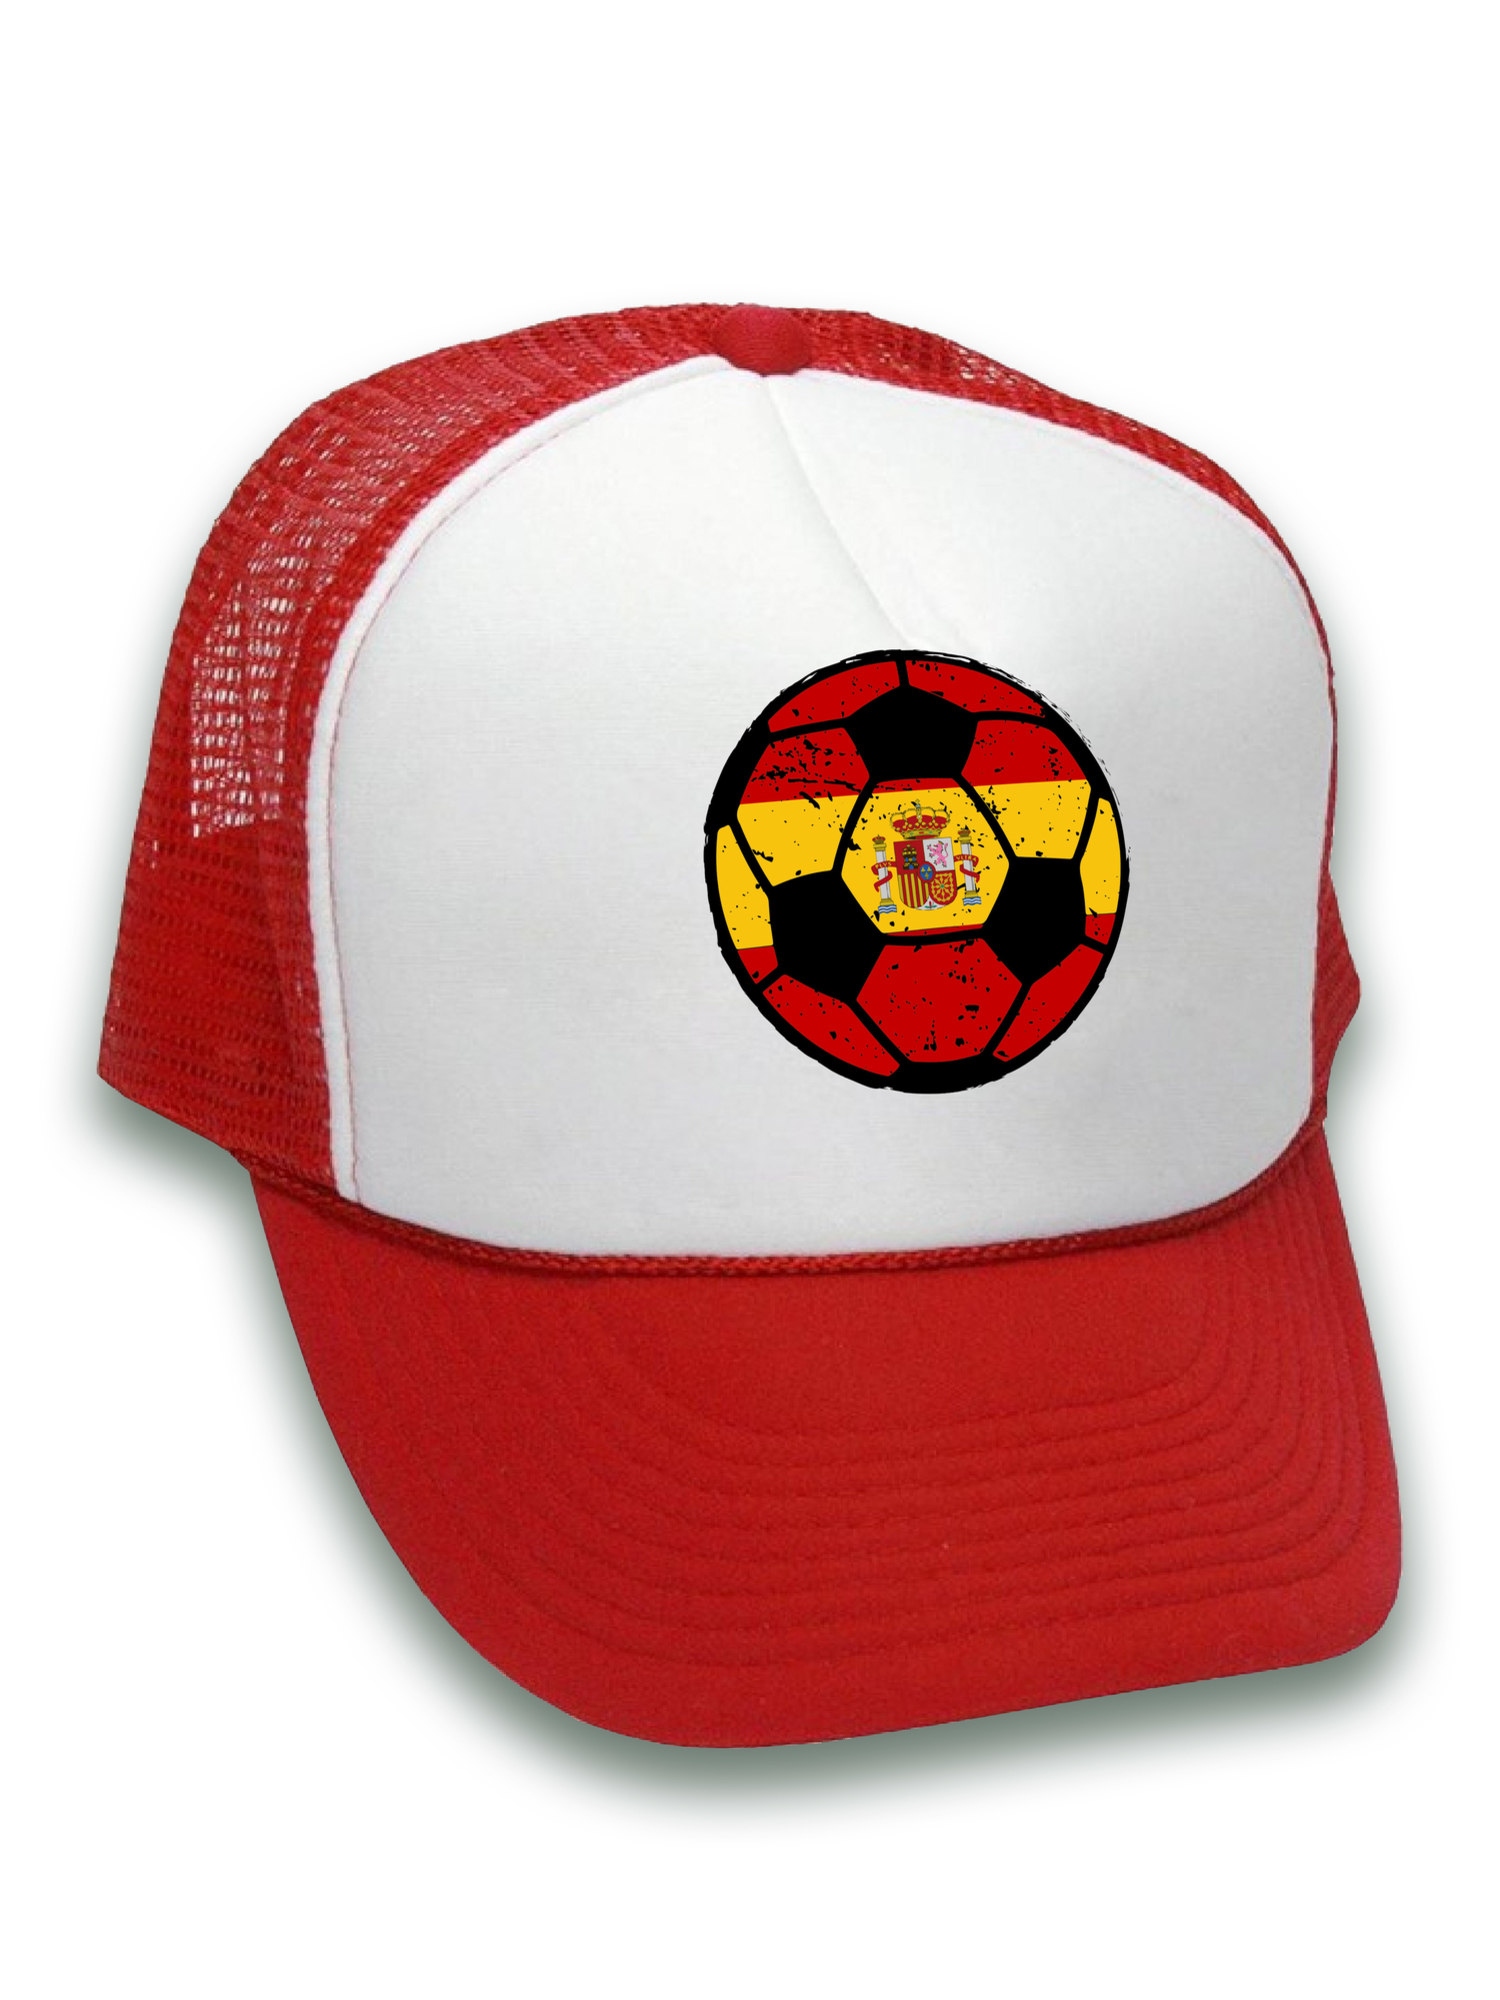 Awkward Styles Spain Soccer Ball Hat Spanish Soccer Trucker Hat Spain 2018 Baseball Cap Spain Trucker Hats for Men and Women Hat Gifts from Spain Spanish Baseball Hats Spanish Flag Trucker Hat - image 2 of 6